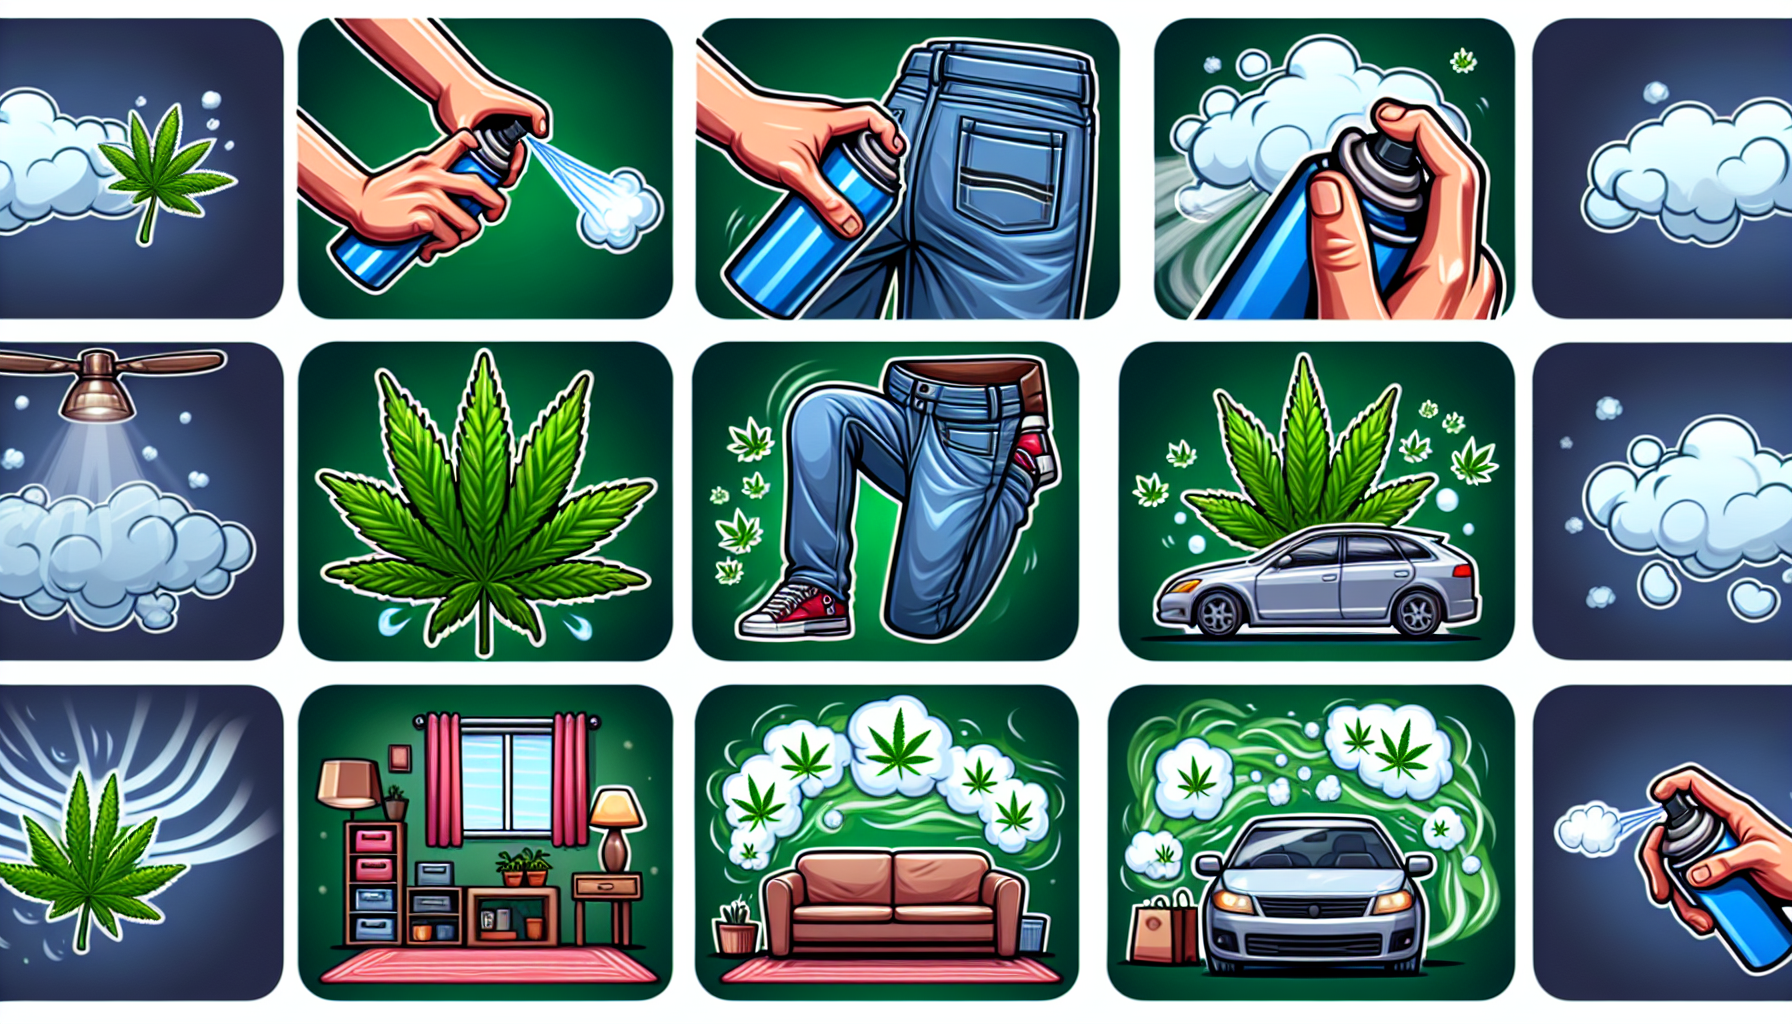 Refreshing personal items and spaces to eliminate cannabis odor